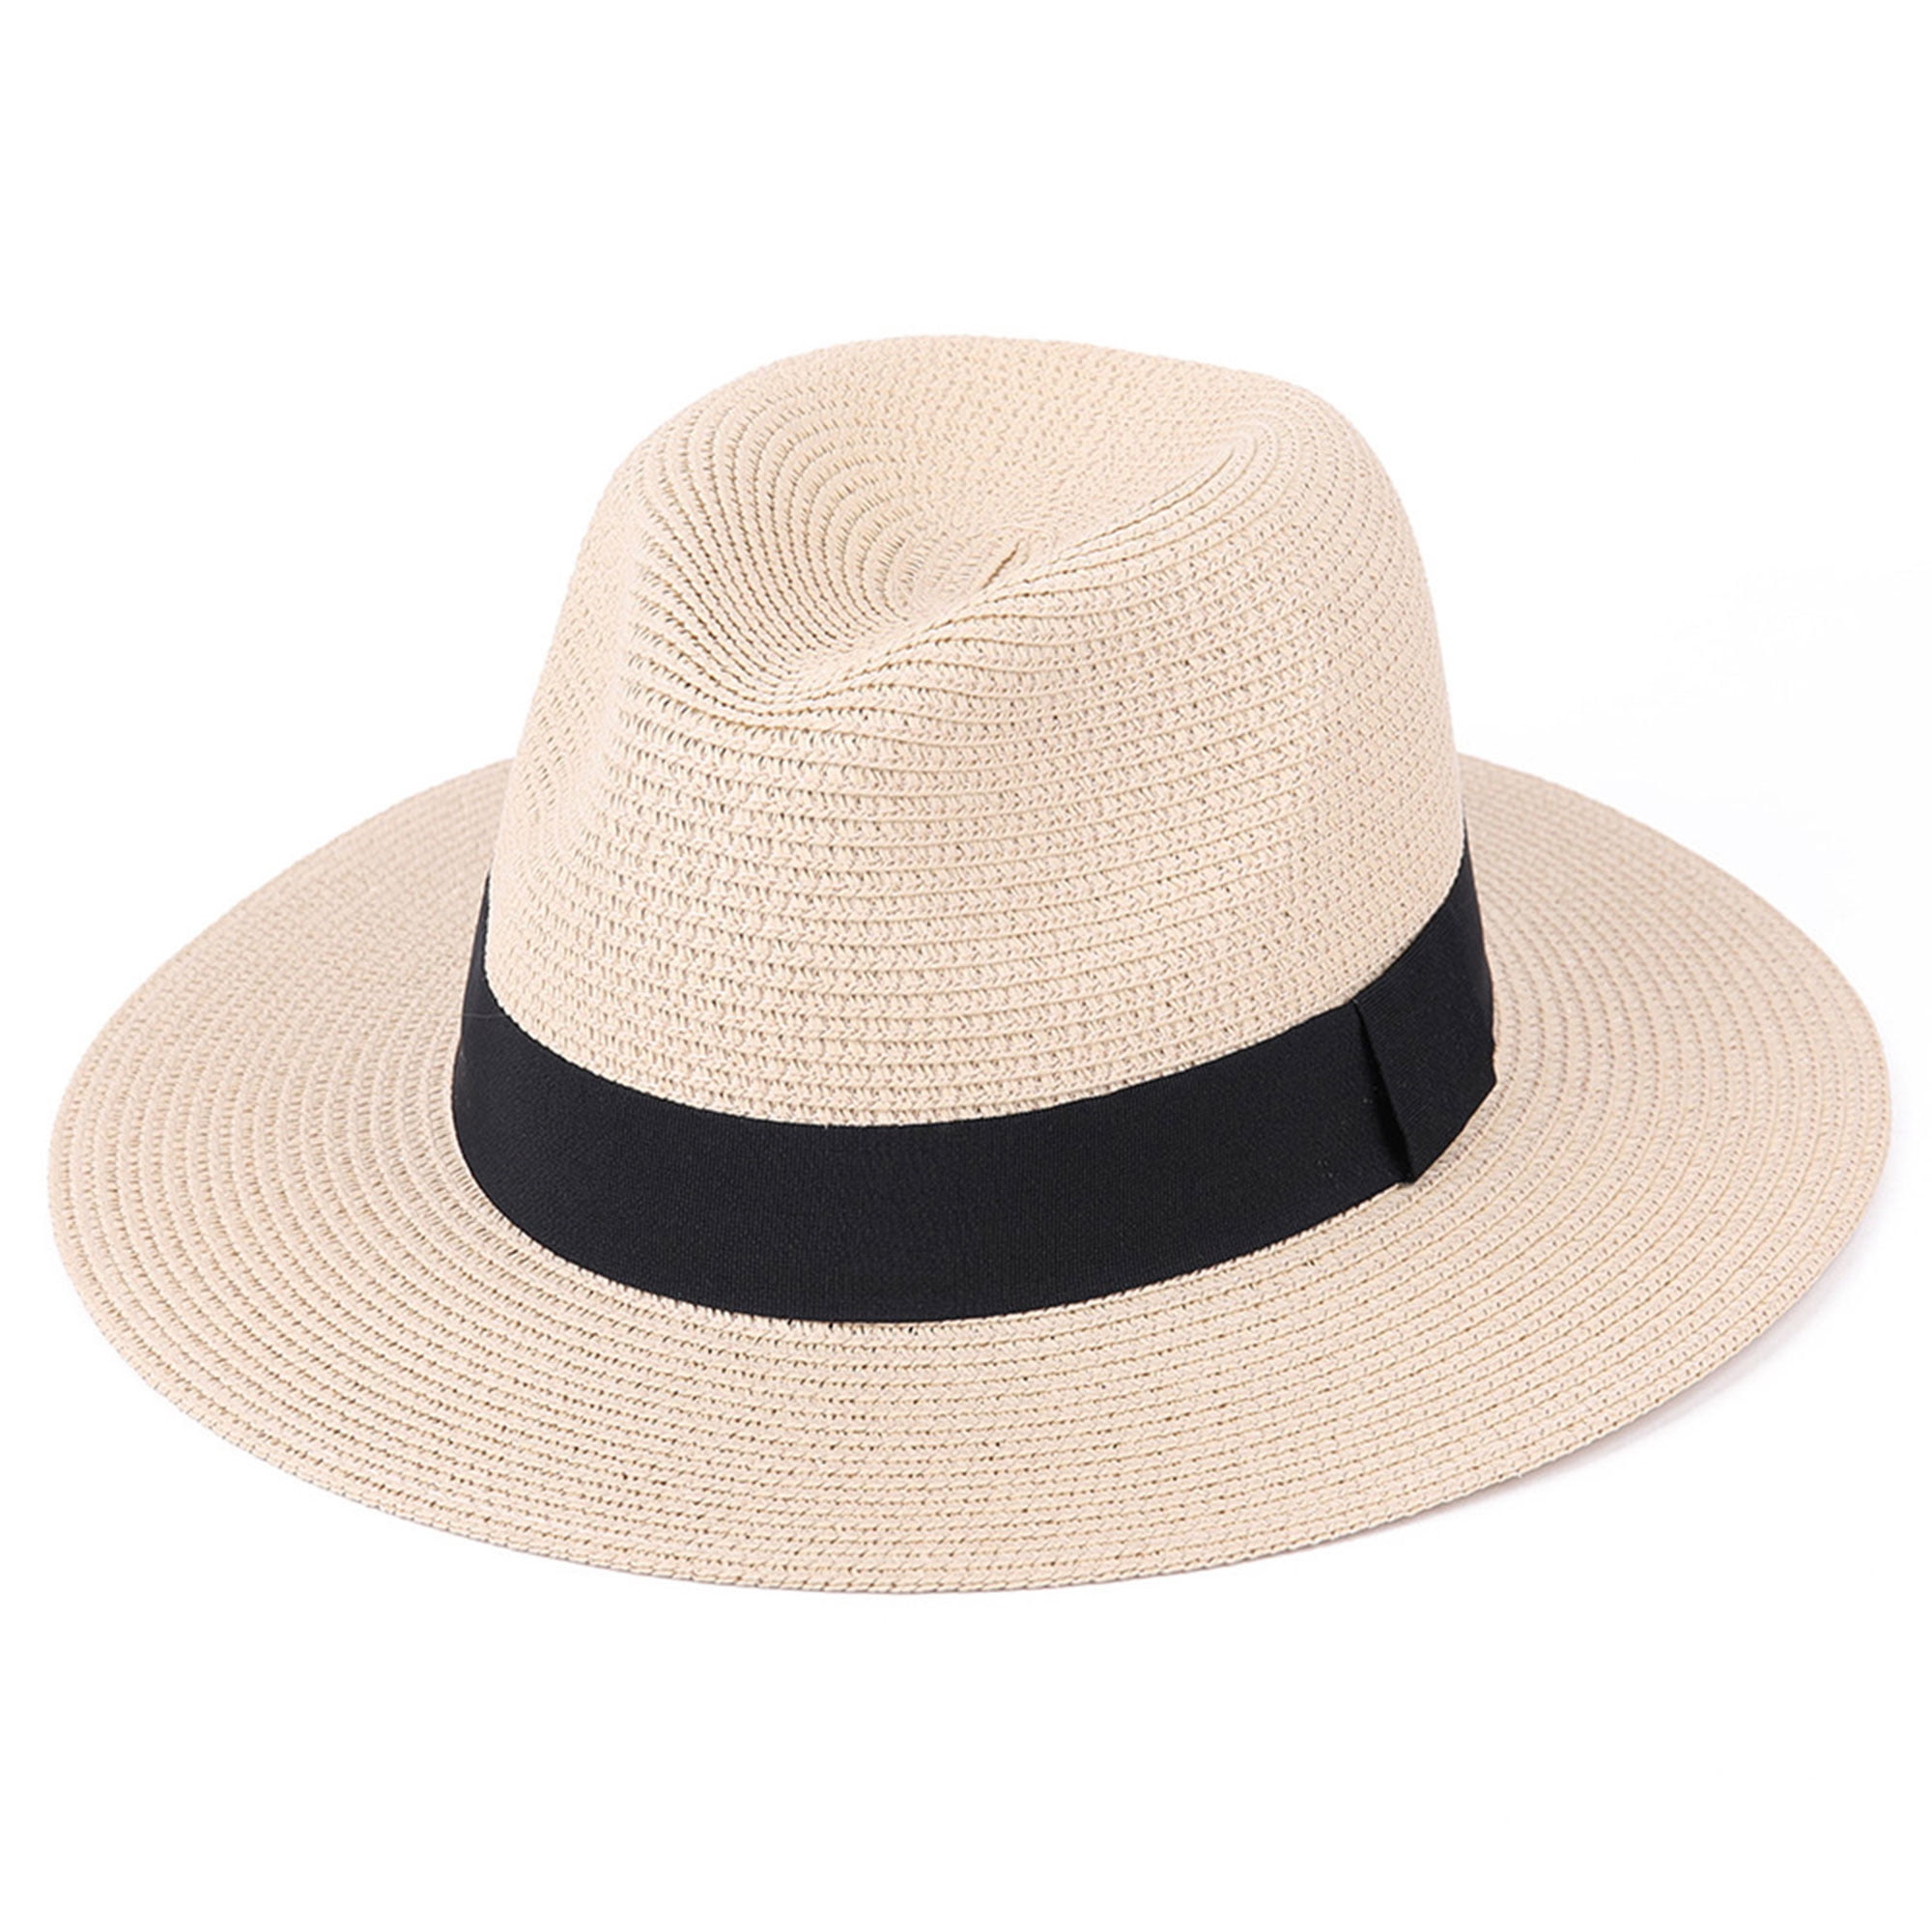 L.V. ￼Raiders Unisex Summer Fedora Panama Straw Hat with Band (Ship in a  box)